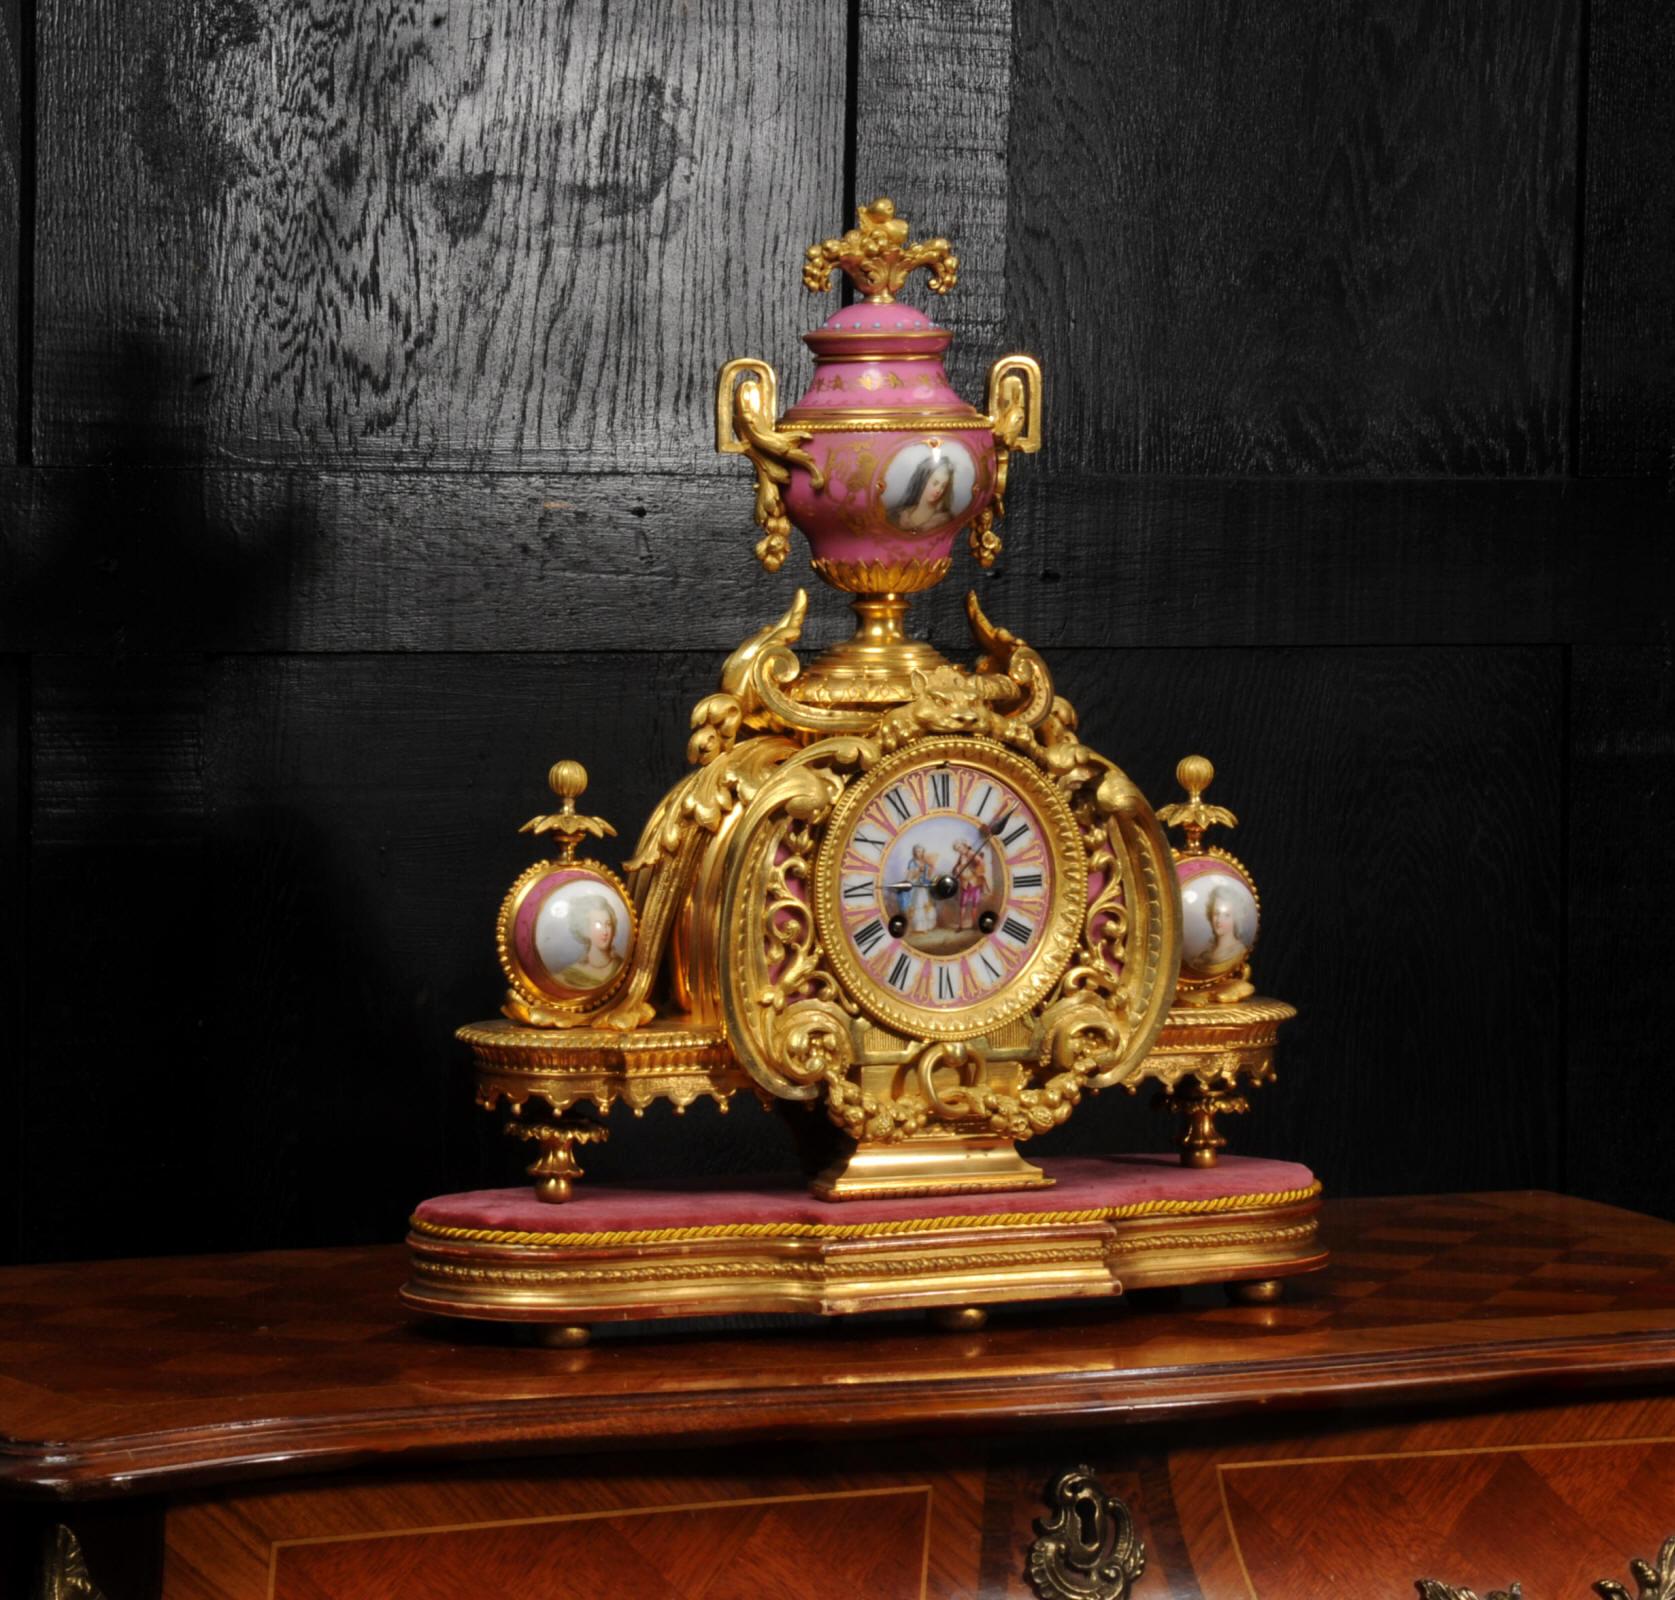 Ormolu and Sevres Porcelain Antique French Clock by Achille Brocot In Good Condition For Sale In Belper, Derbyshire